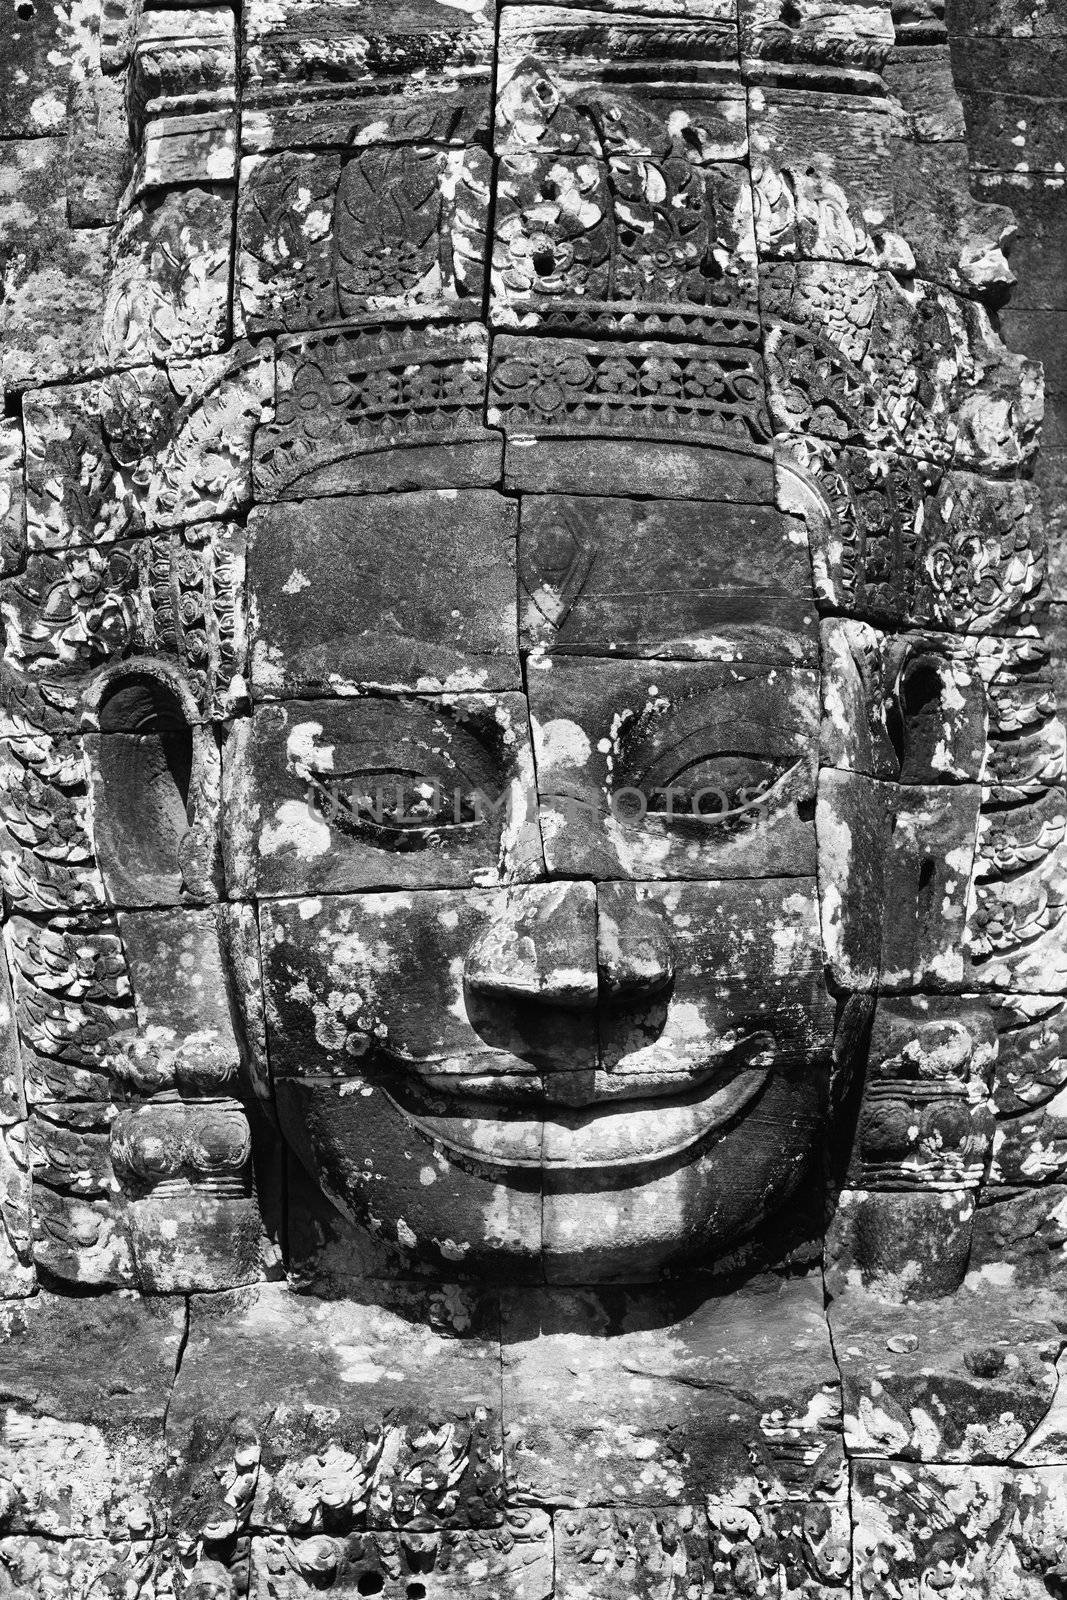 Panoramic picture of a face in Bayon temple in Angkor Wat Cambodia